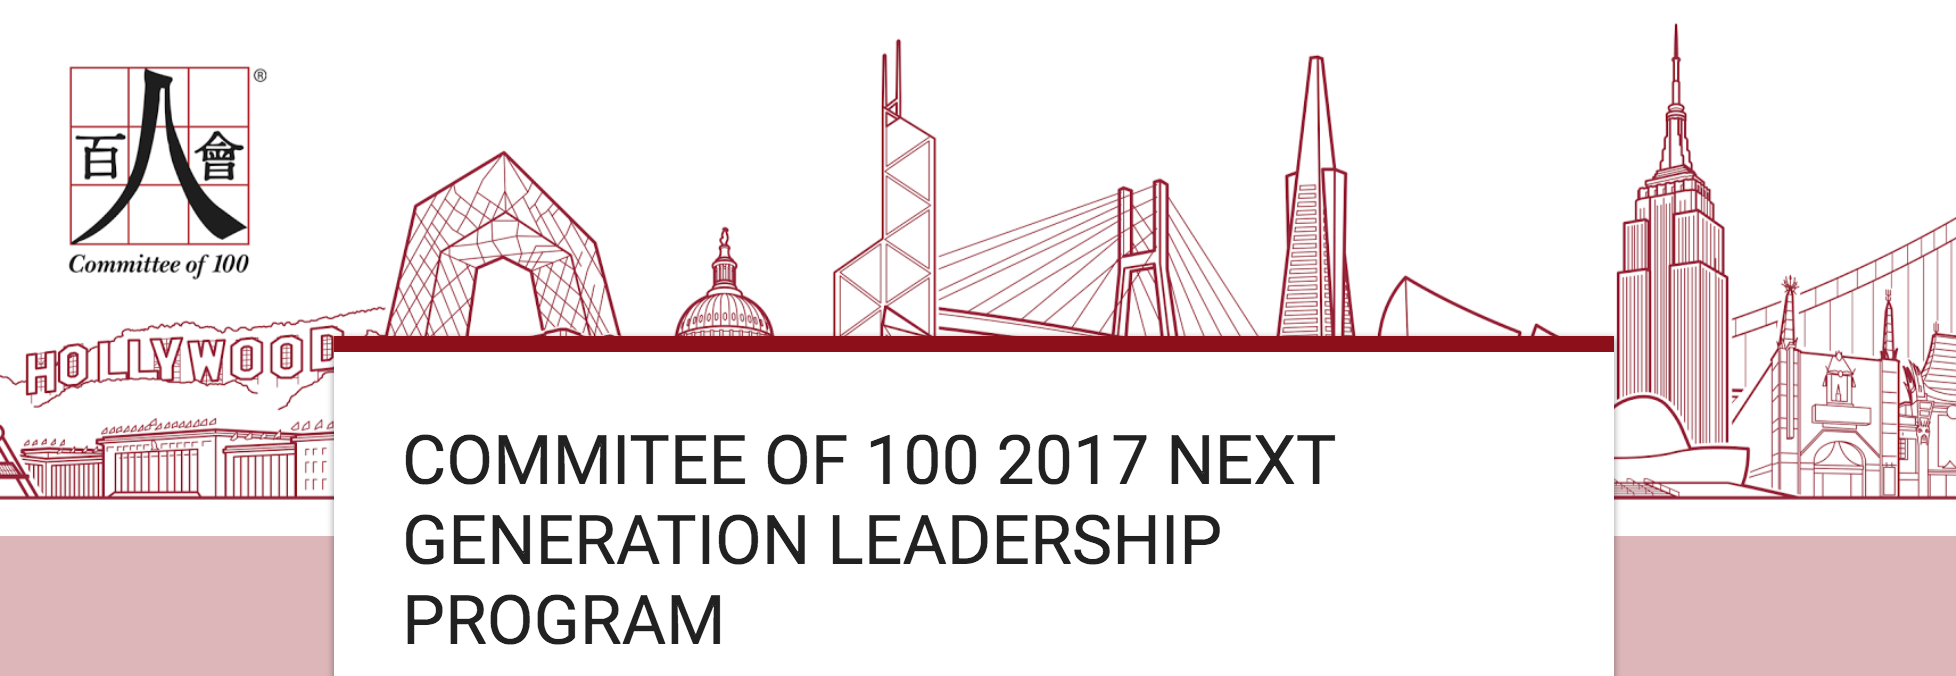 BECOME A COMMITTEE OF 100 NEXT GENERATION LEADER